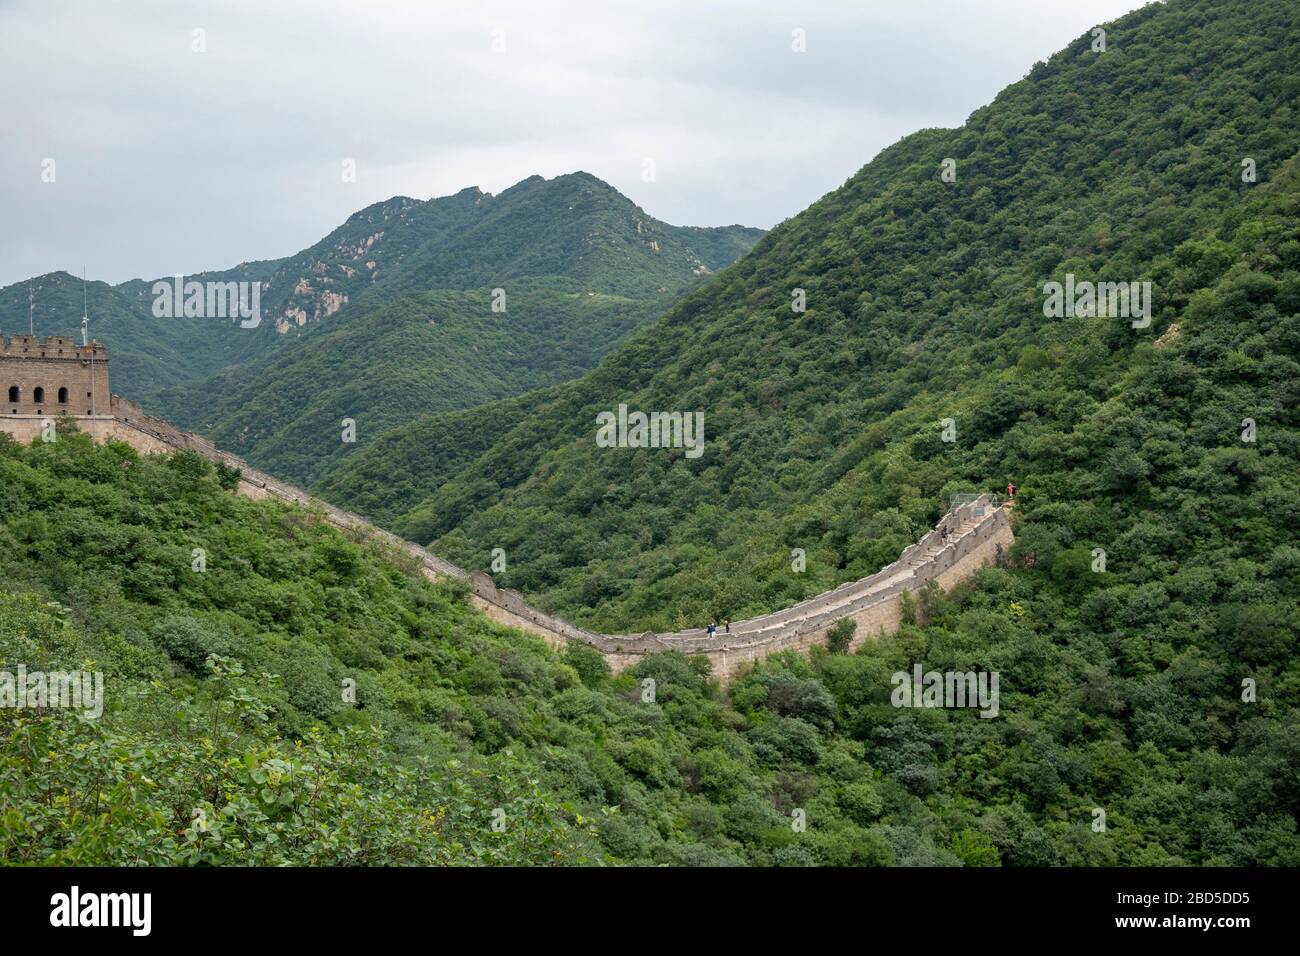 abrupt end of restored part of Great Wall of China, Yanqing District, near Beijing, China Stock Photo